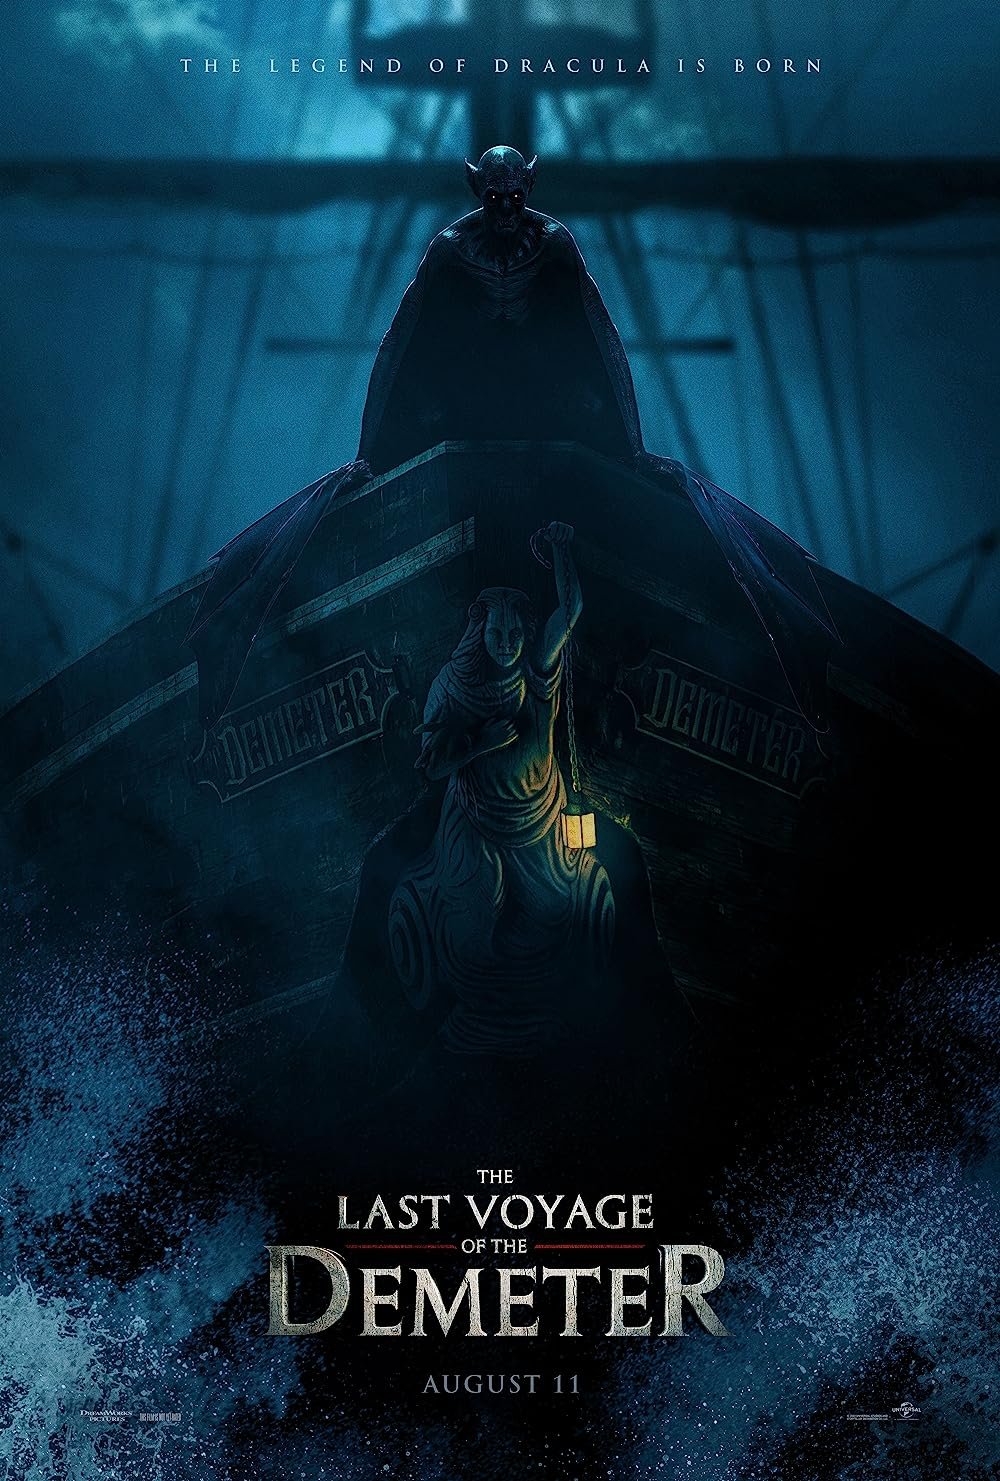 The Last Voyage Of The Demeter images © Universal Pictures